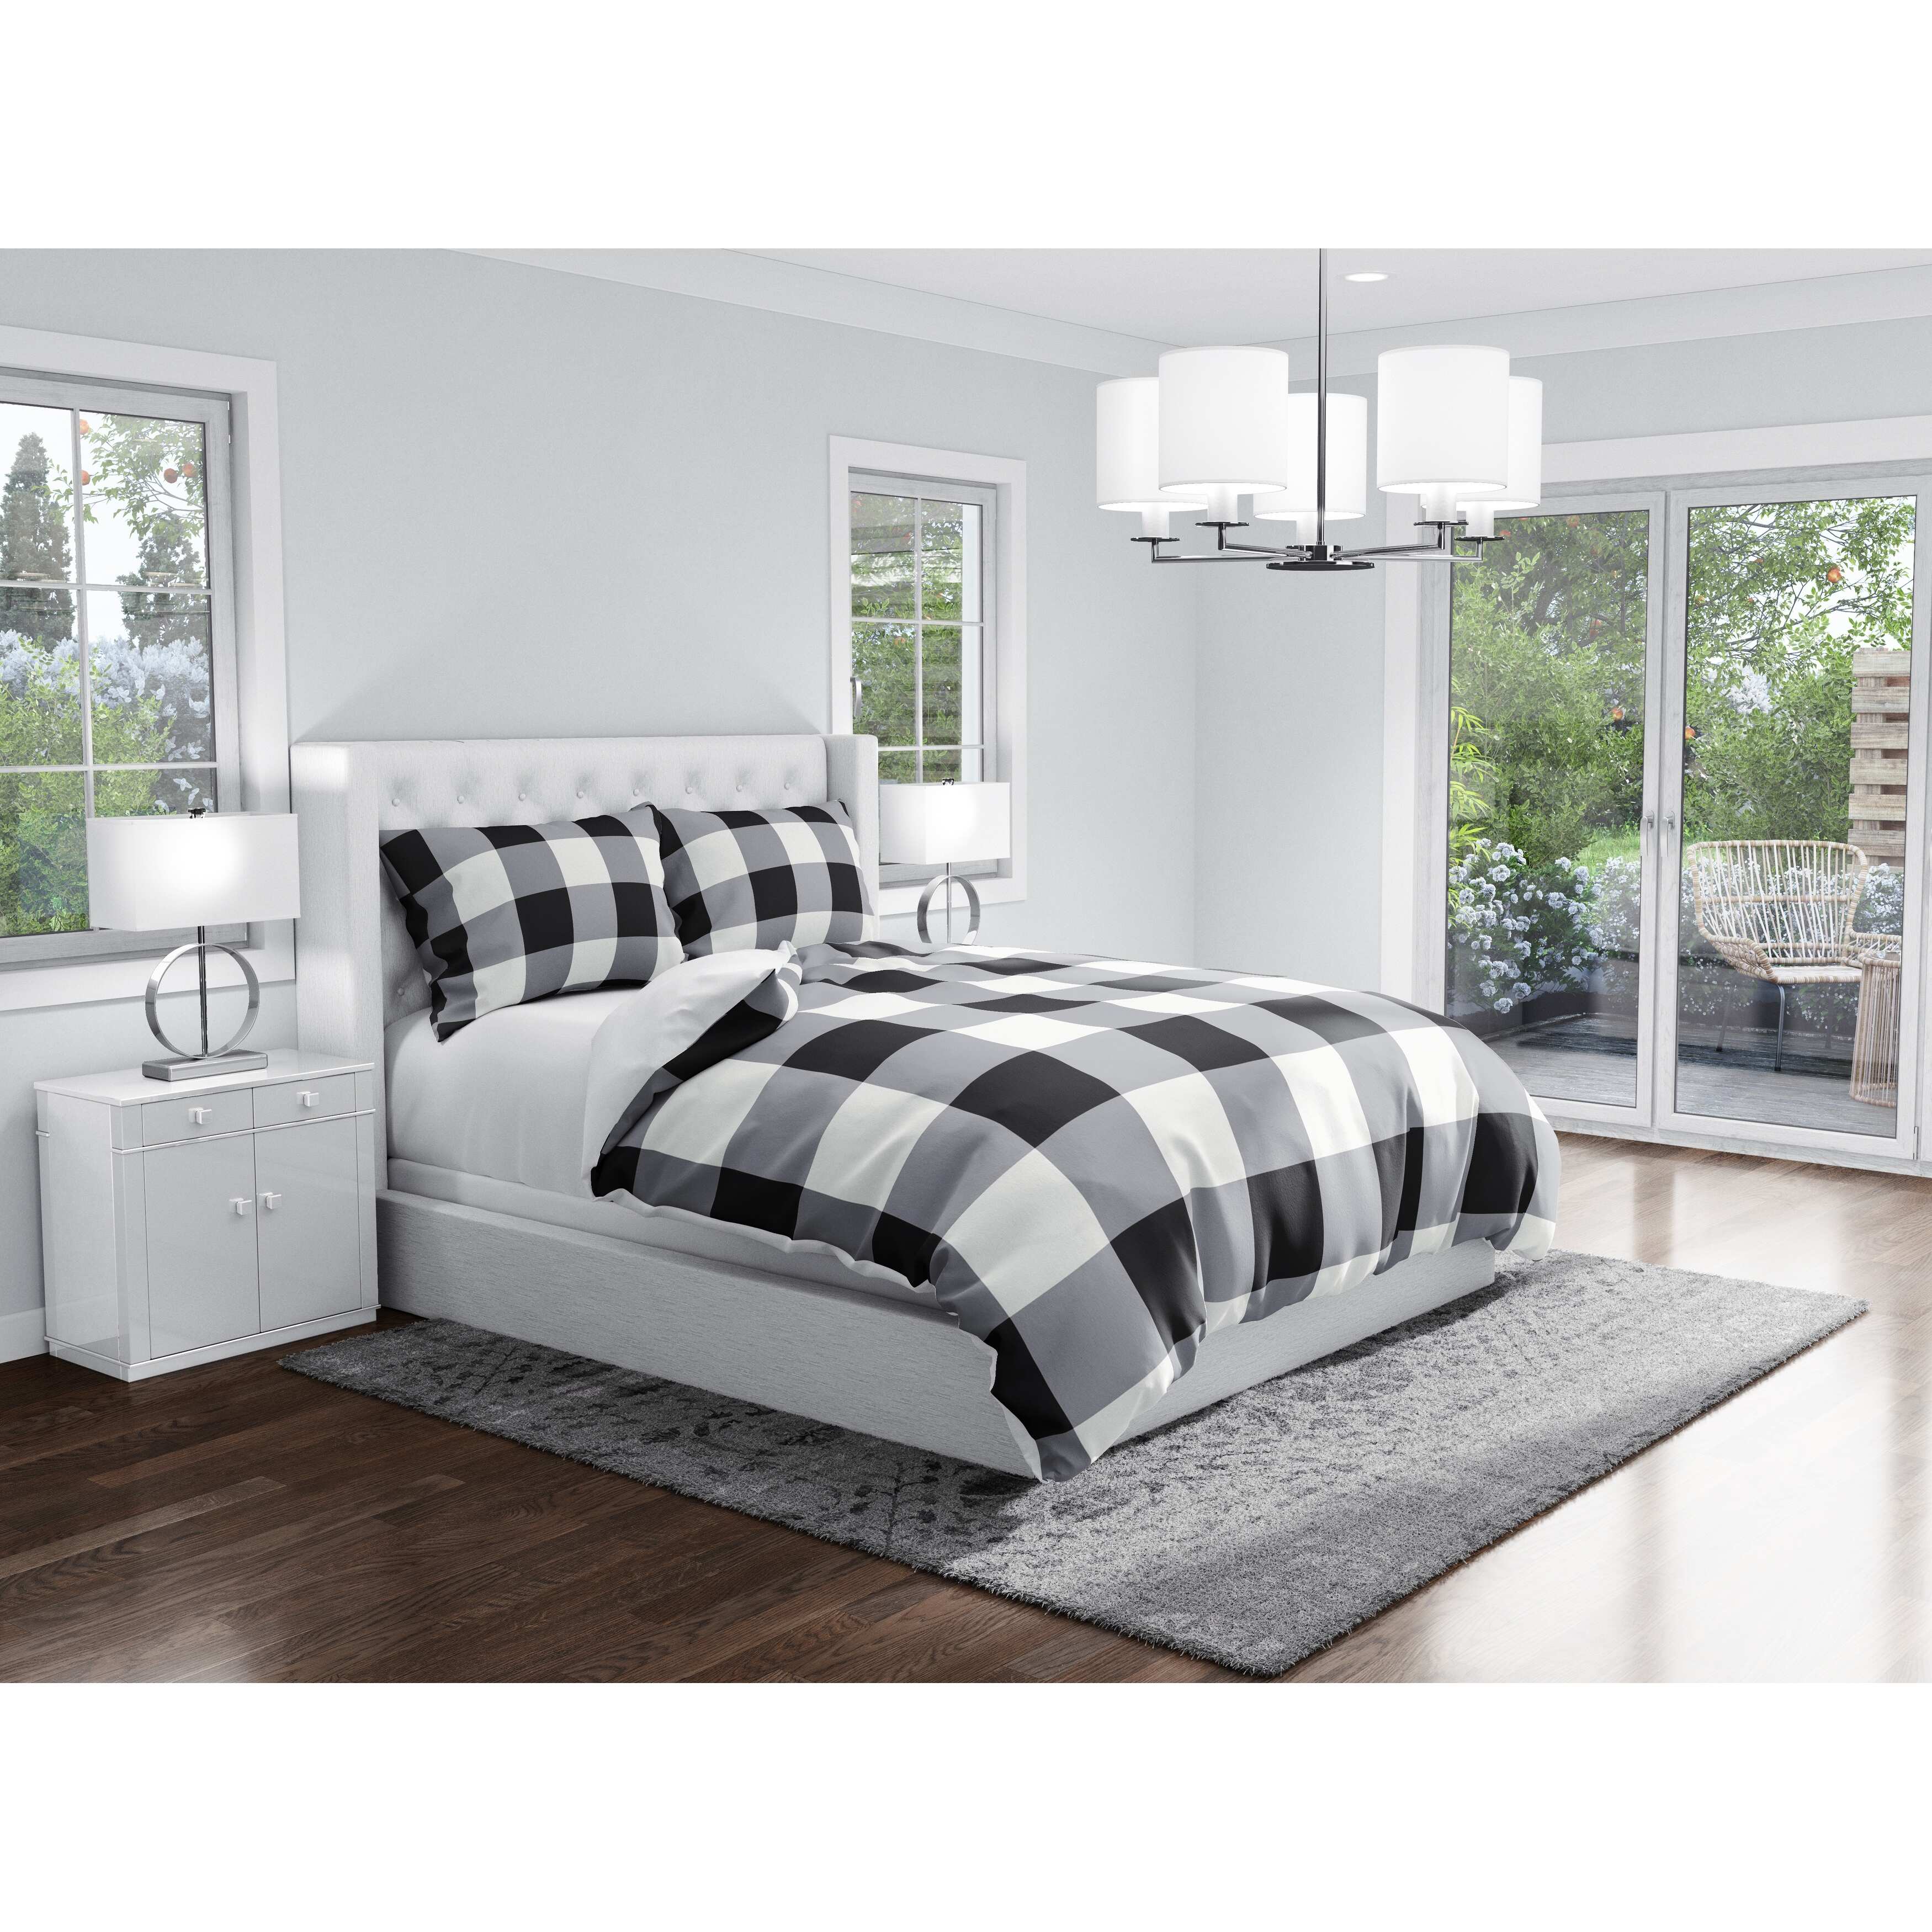 HOLIDAY BLACK AND WHITE PLAID Duvet Cover By Kavka Designs